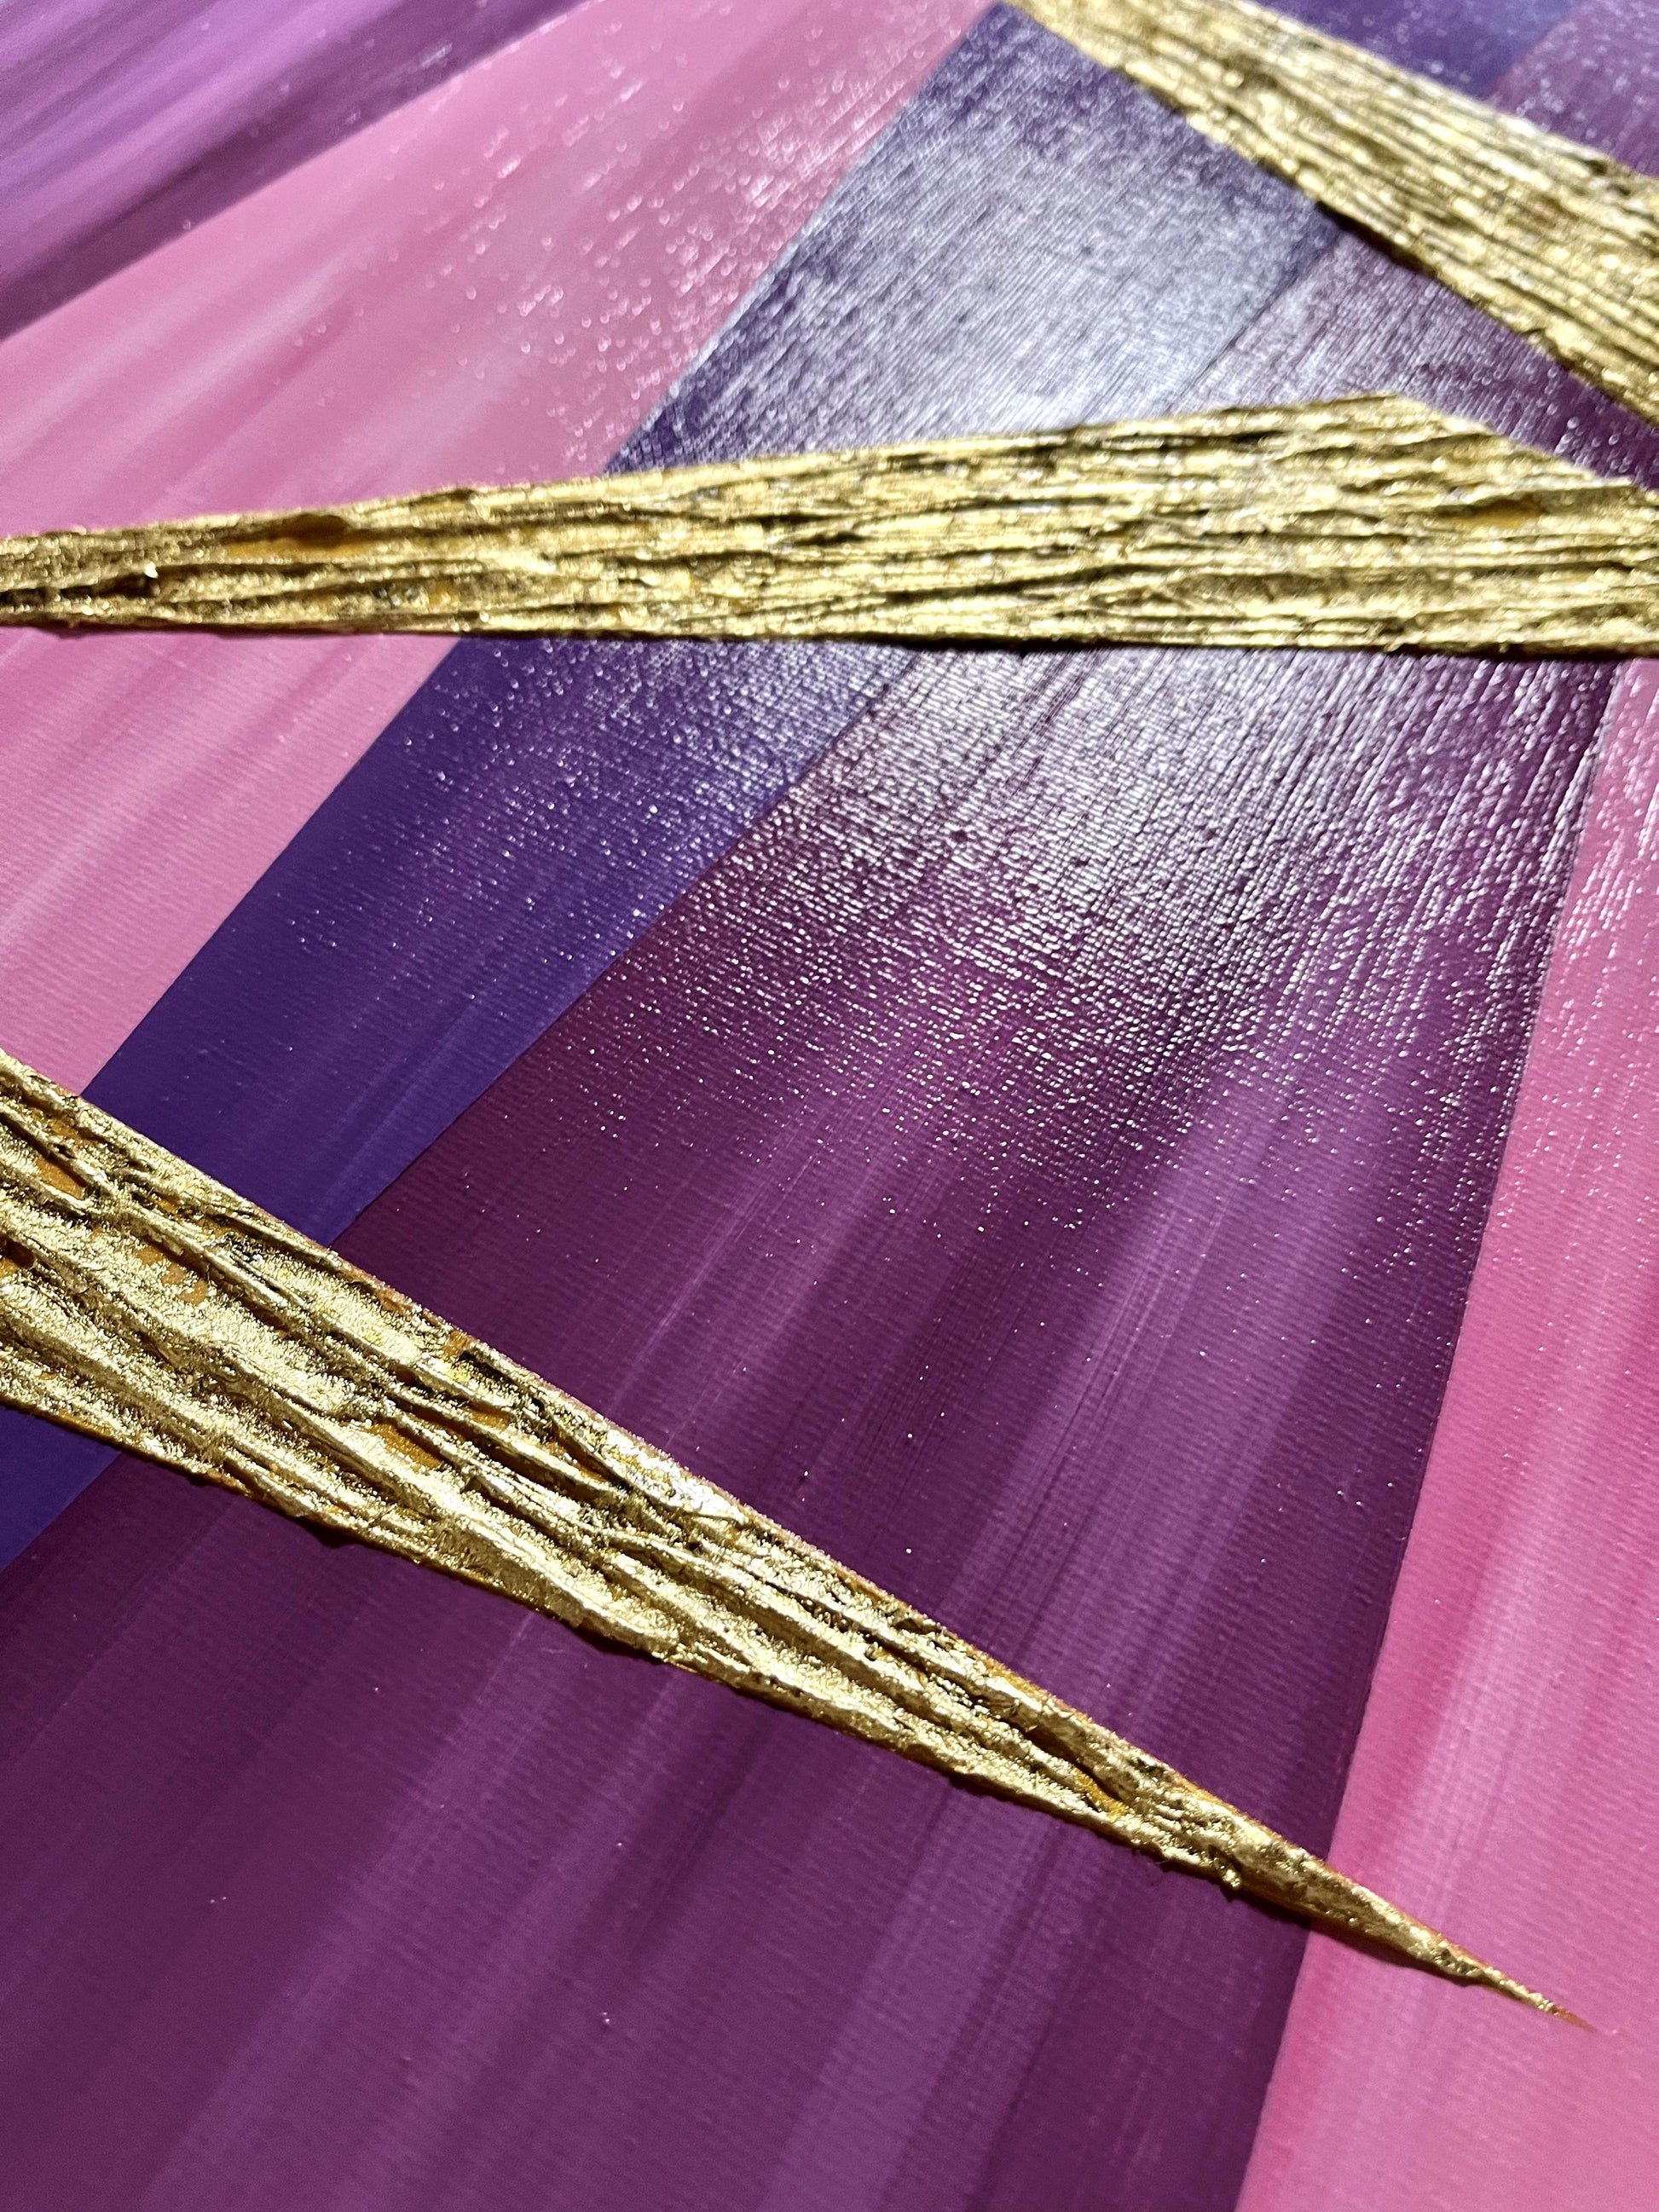 3 triangle （gold-pink） - FROM ARTIST